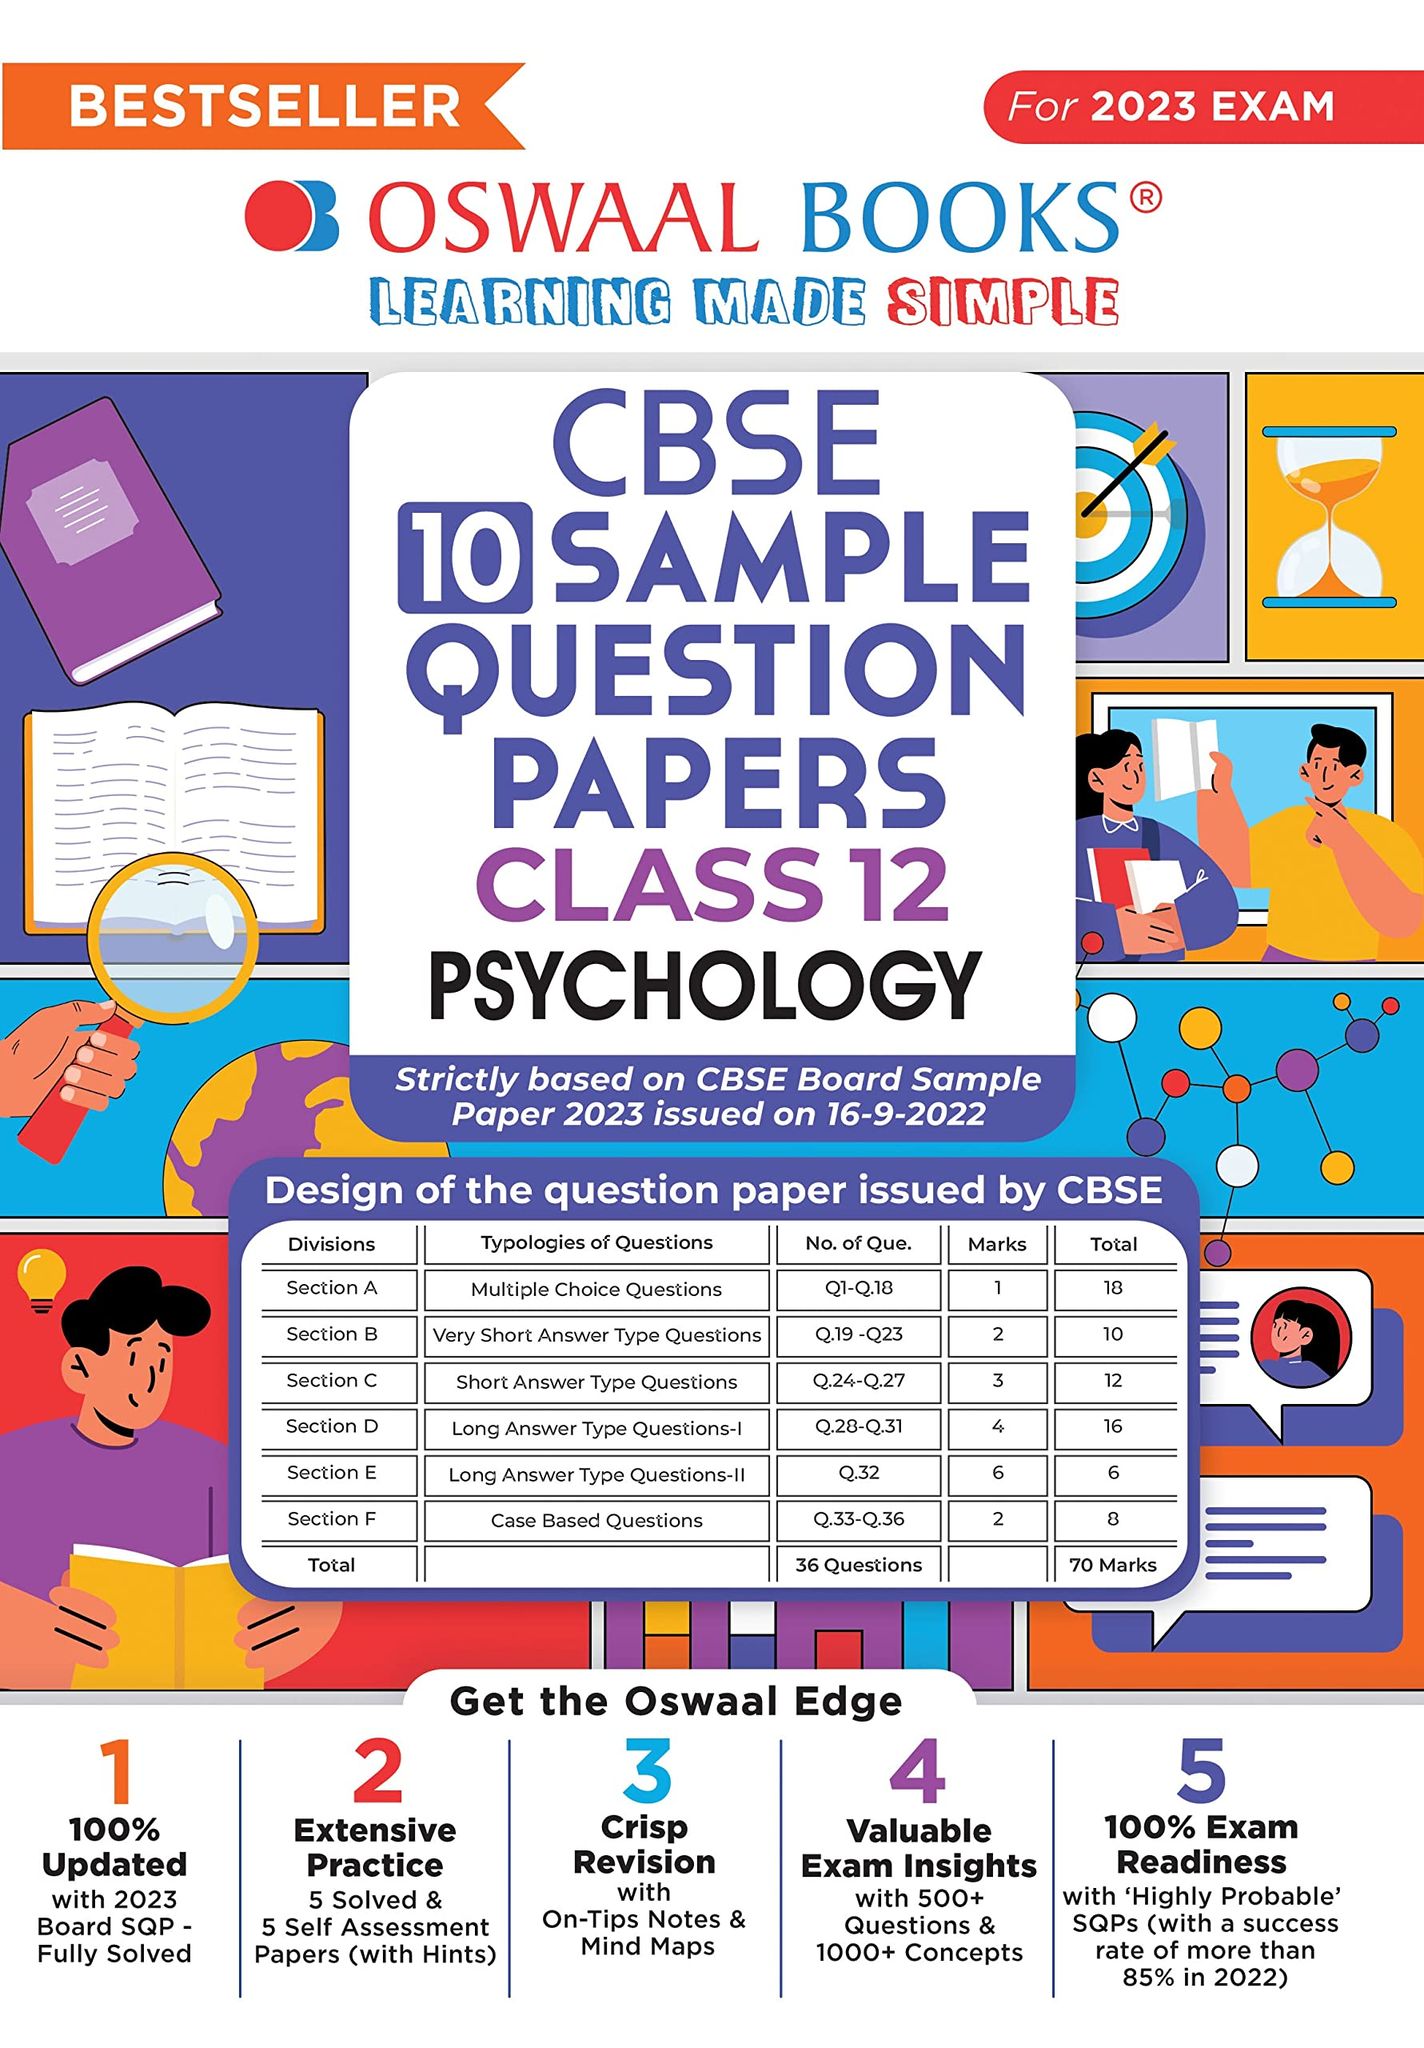 Oswaal CBSE Sample Question Papers Class 12 Psychology Hardcover for 2023 Board Exam (based on CBSE Sample Paper released on 16th September) [Hardcover] Oswaal Editorial Board